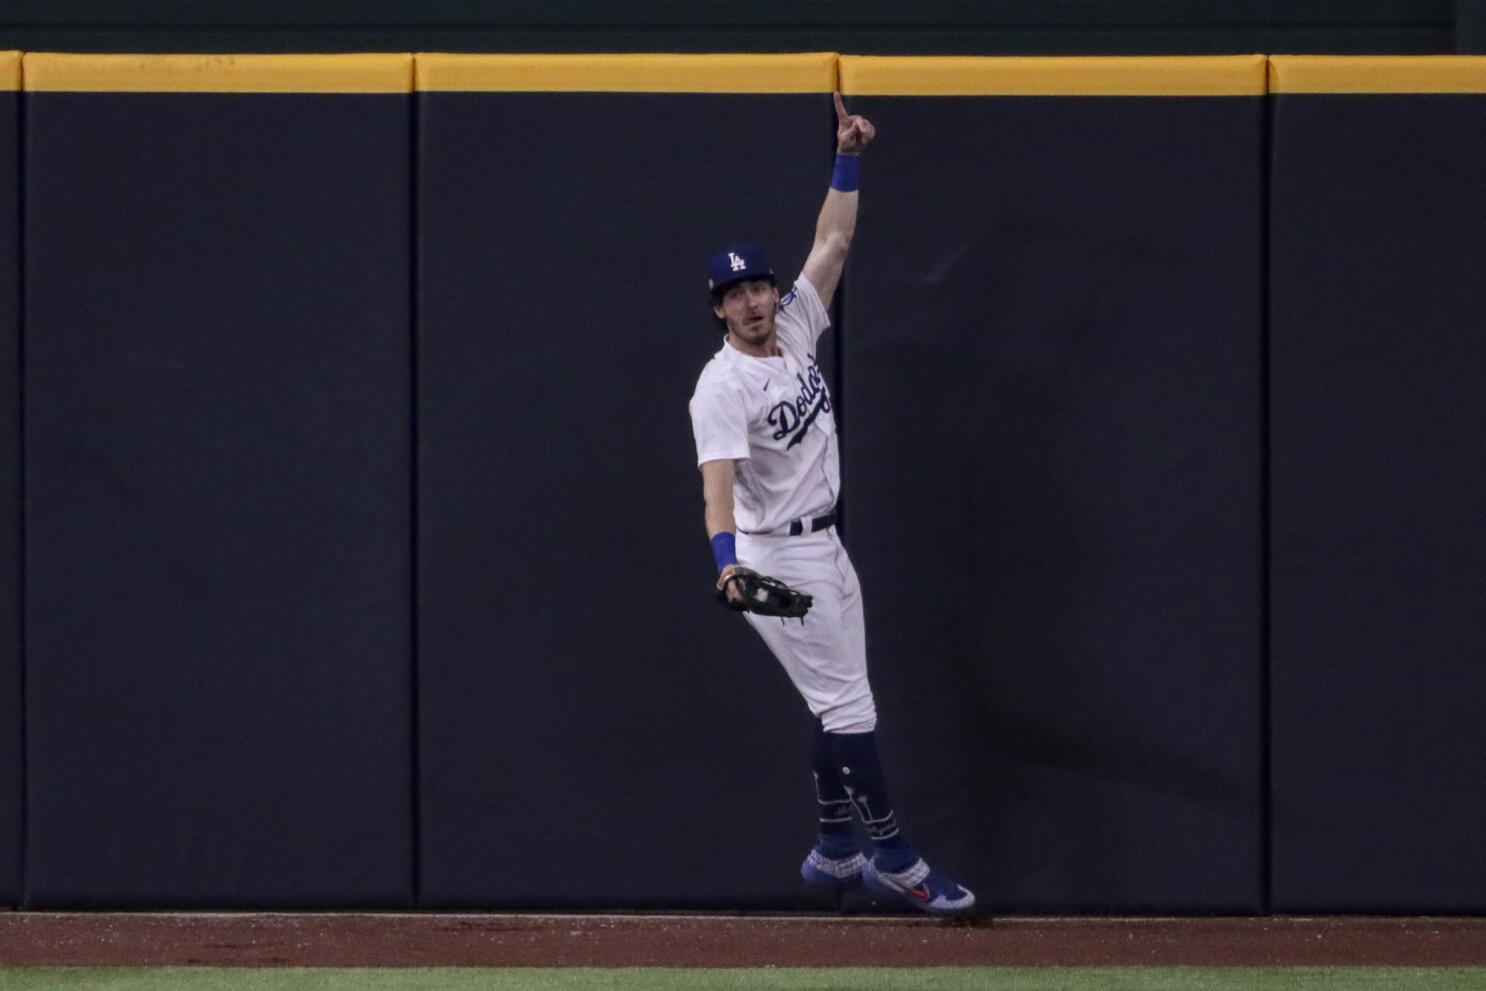 How Cody Bellinger's father witnessed his son's amazing catch